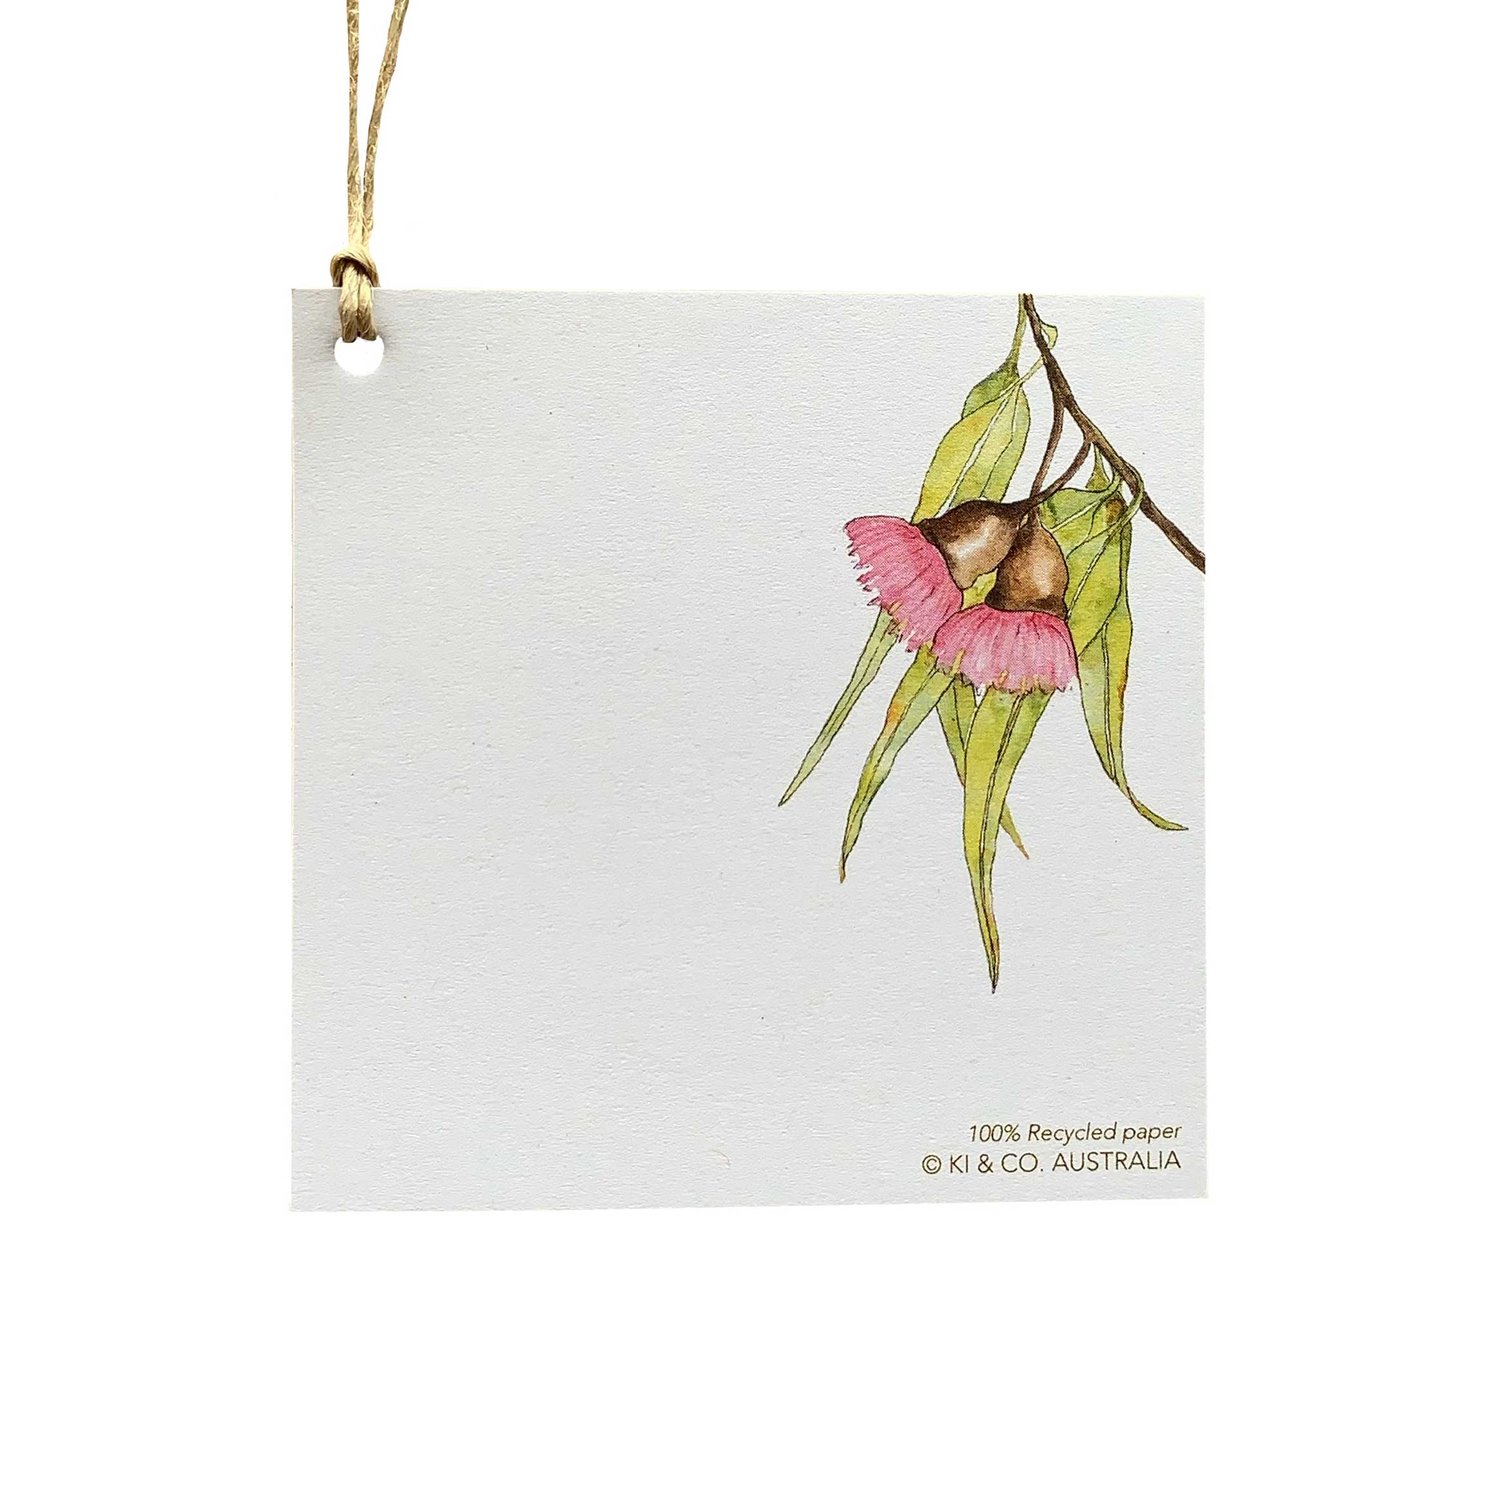 Image of Australian made gift tag - Pink gum blossom with eucalyptus leaves